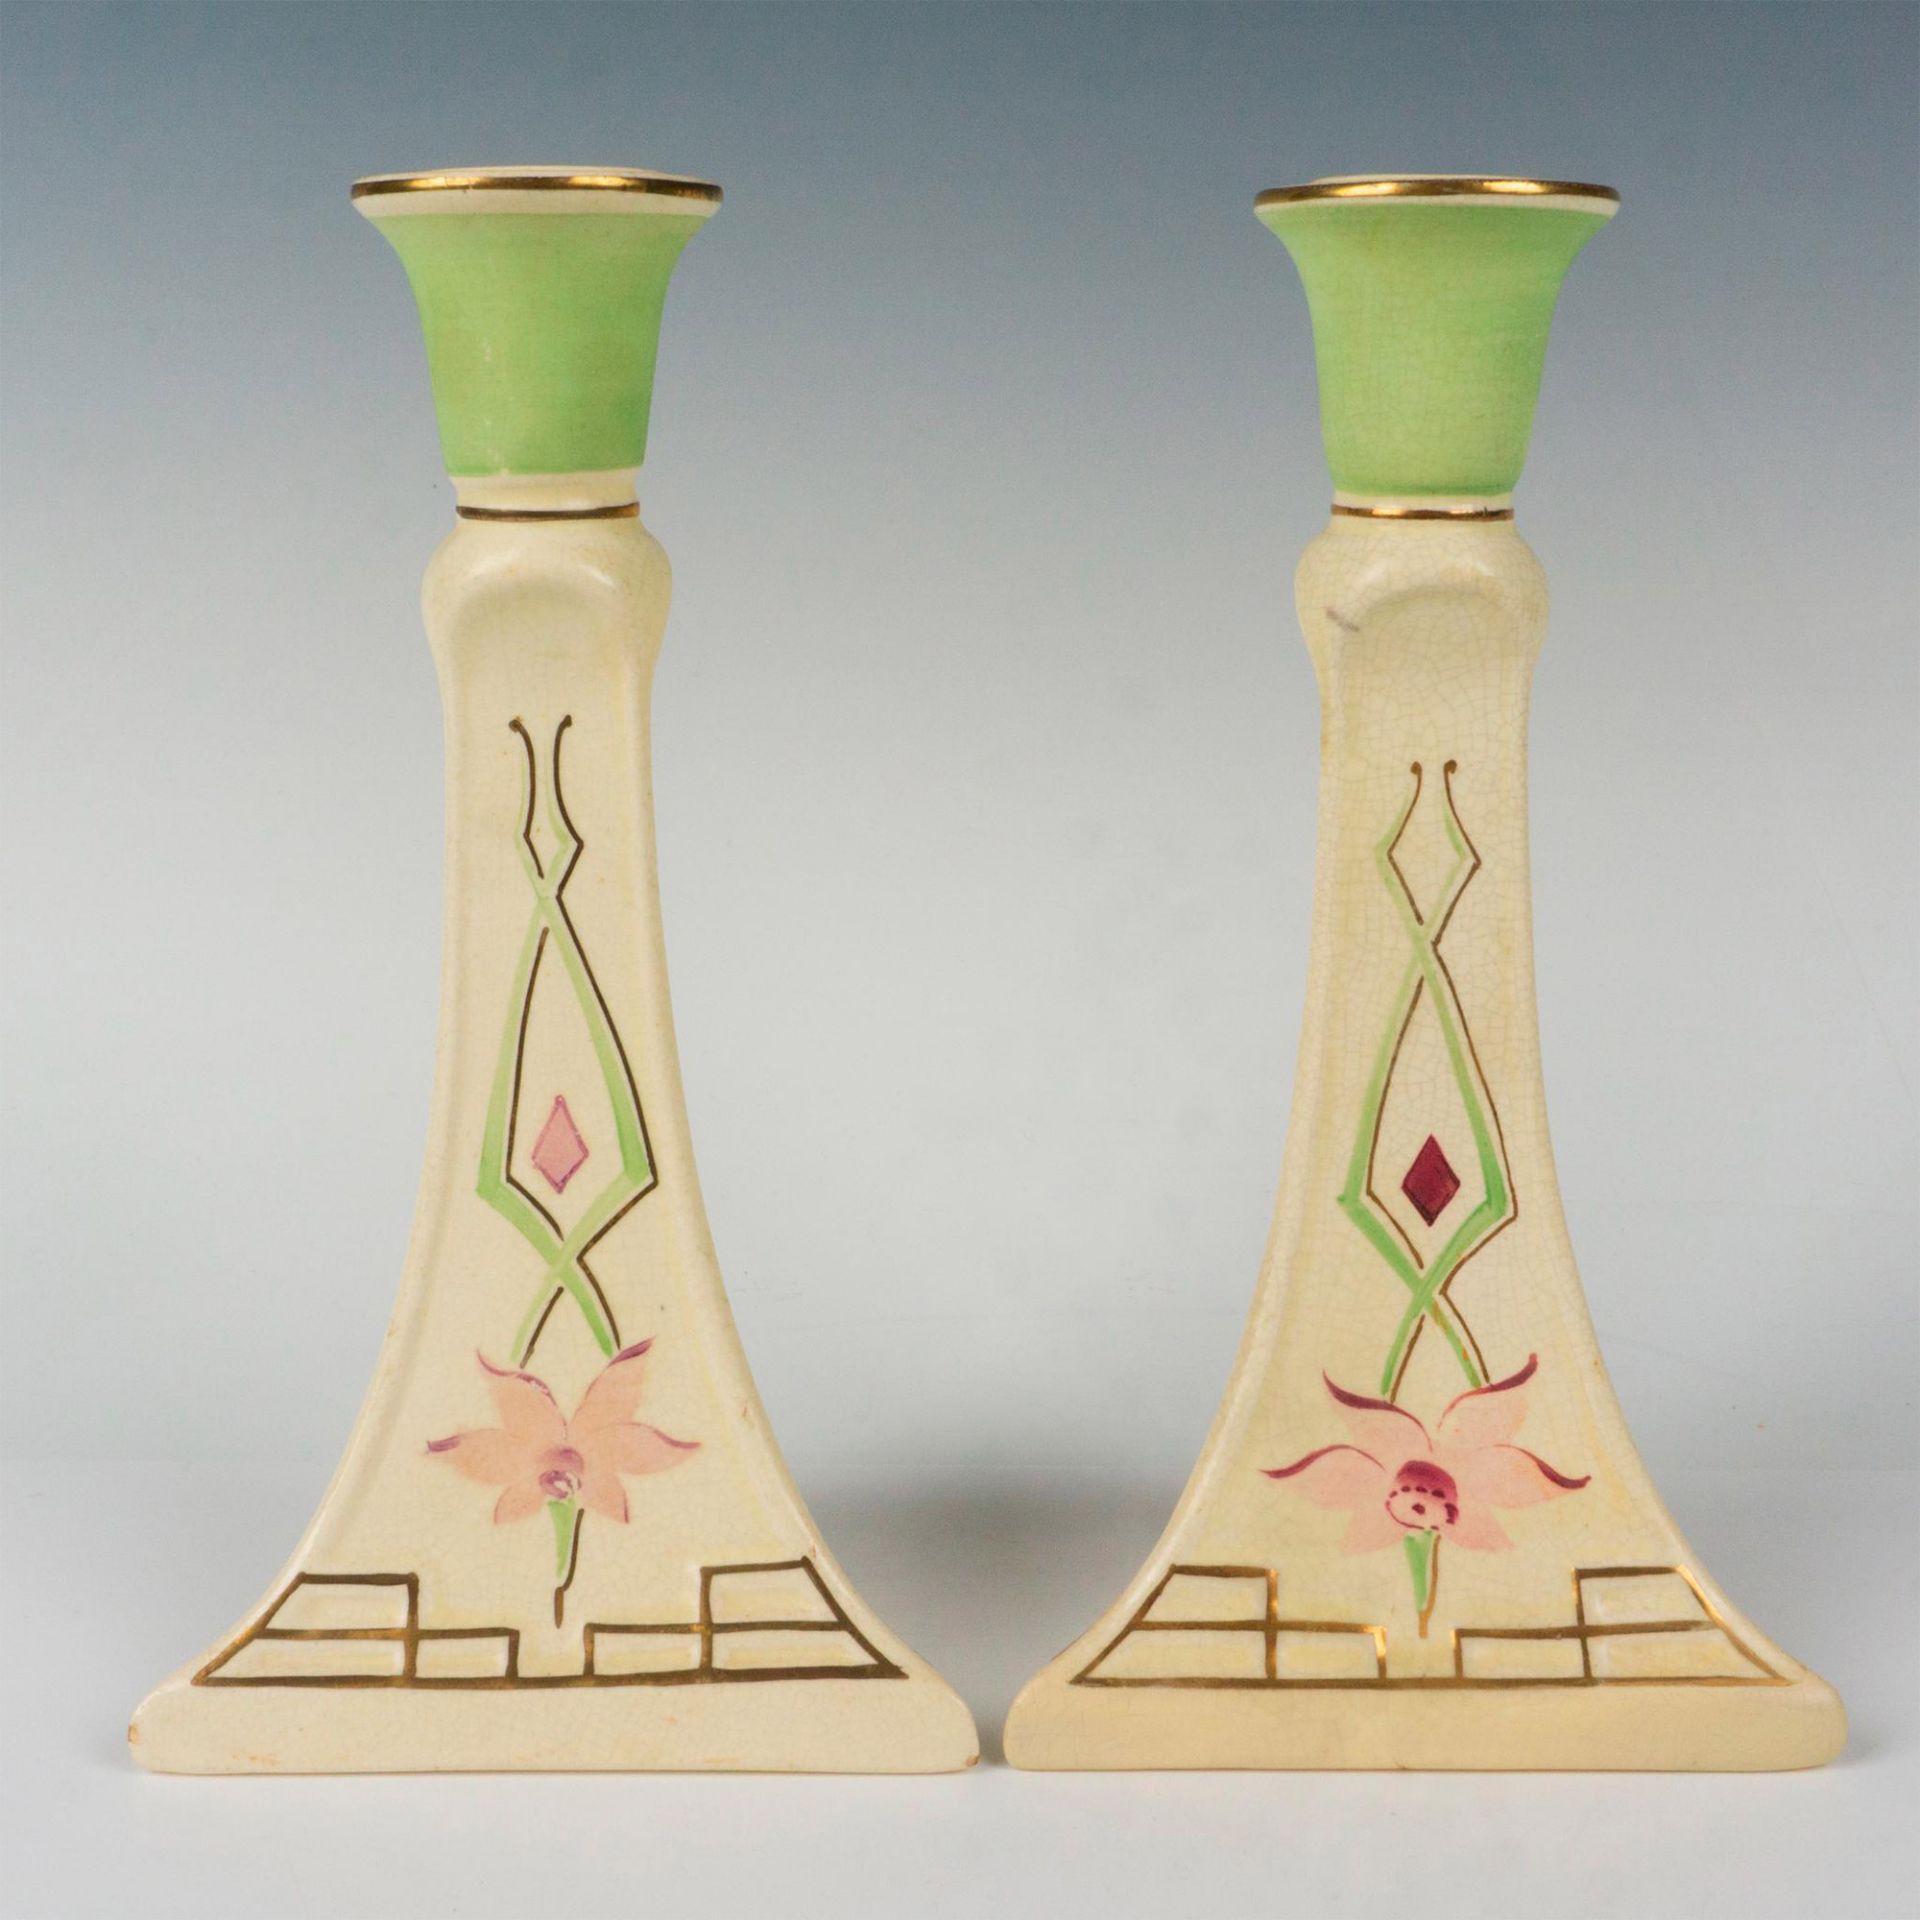 Pair of Antique Roseville Pottery Candlestick Holders